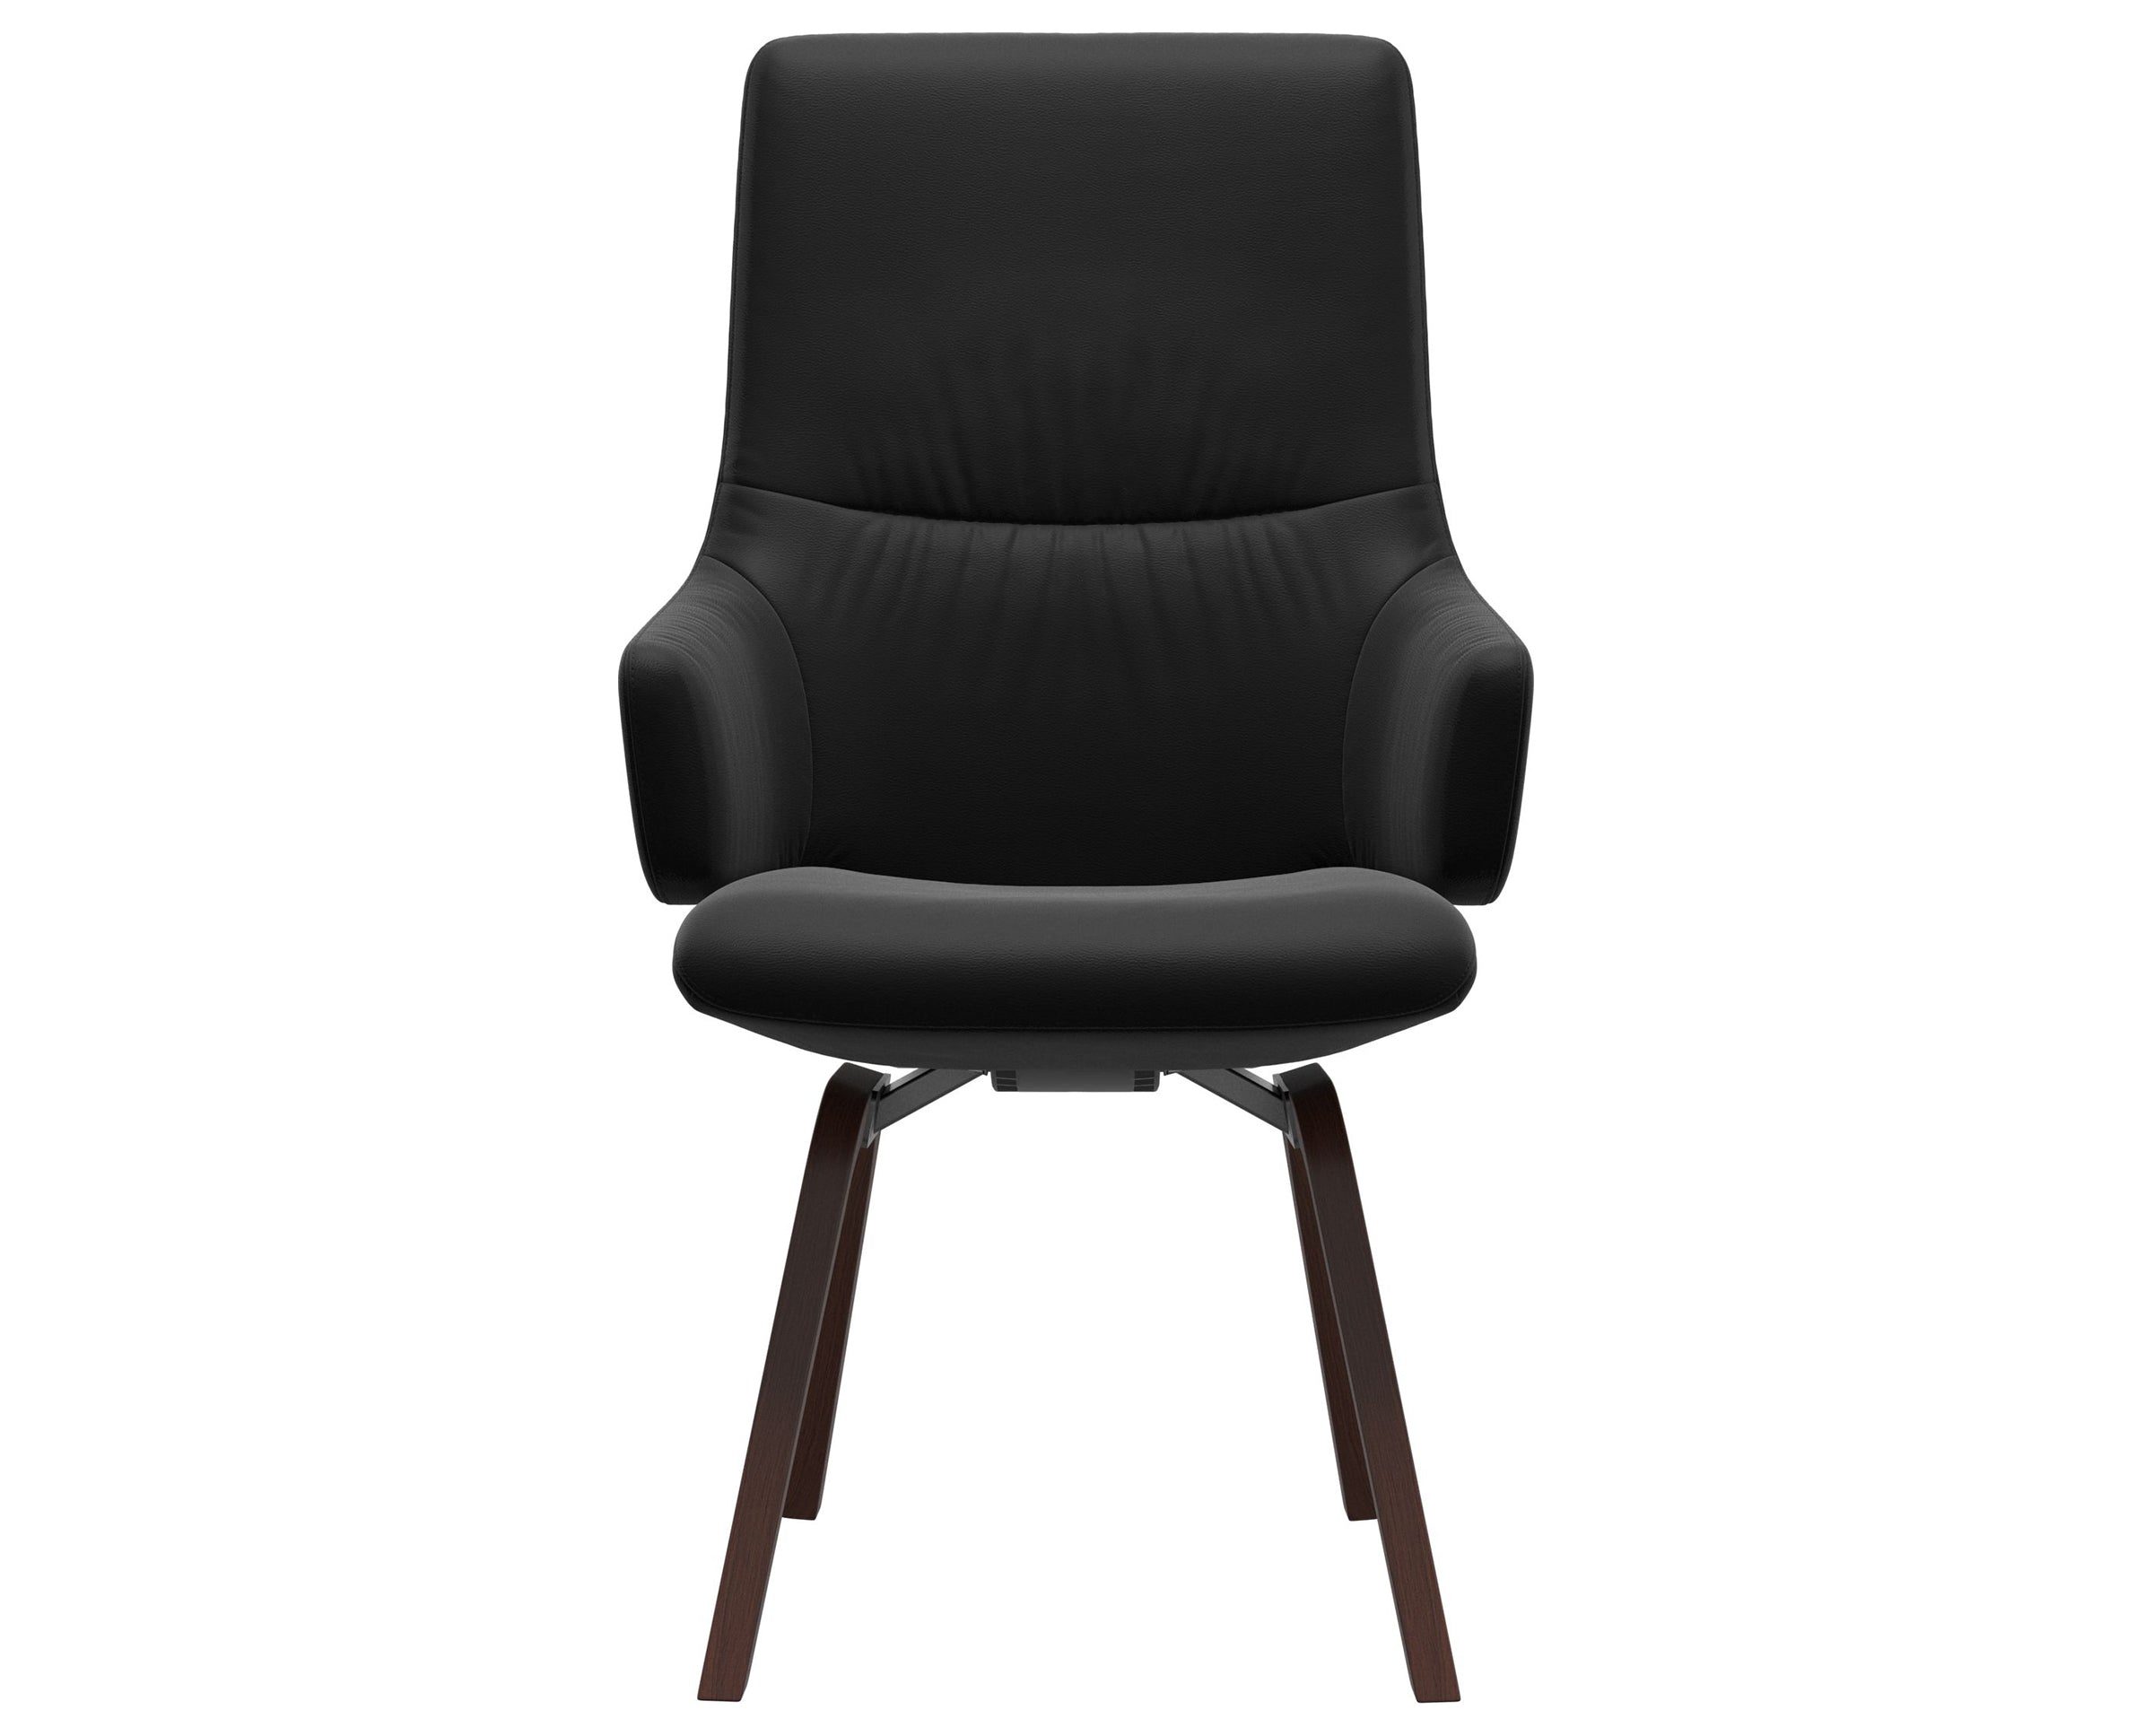 Paloma Leather Black and Walnut Base | Stressless Mint High Back D200 Dining Chair w/Arms | Valley Ridge Furniture